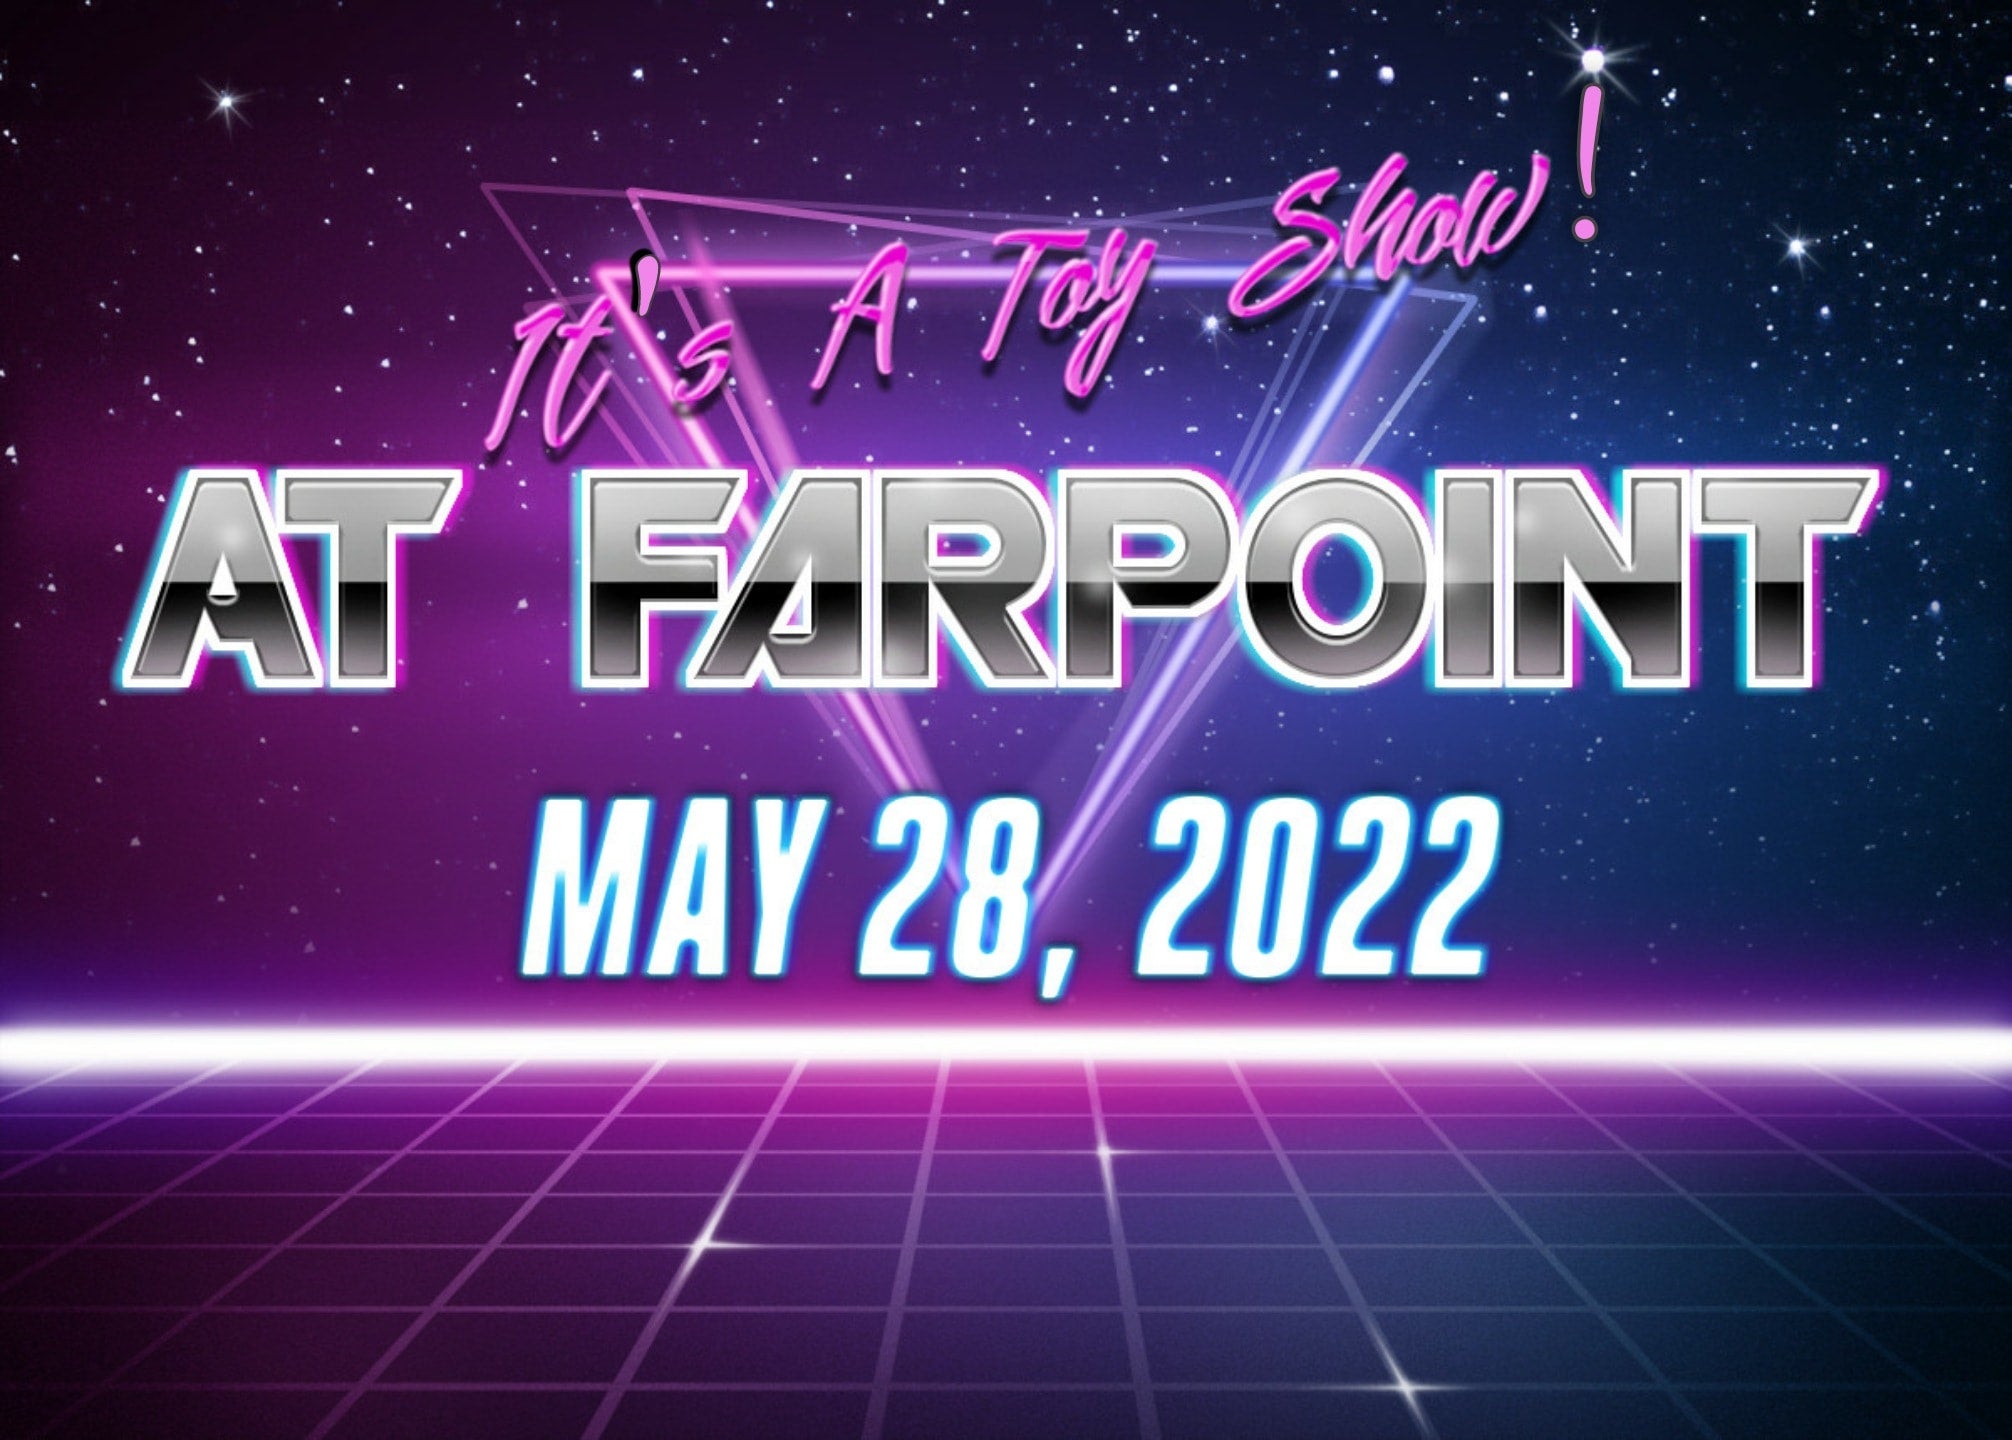 It's A Toy Show 2022!